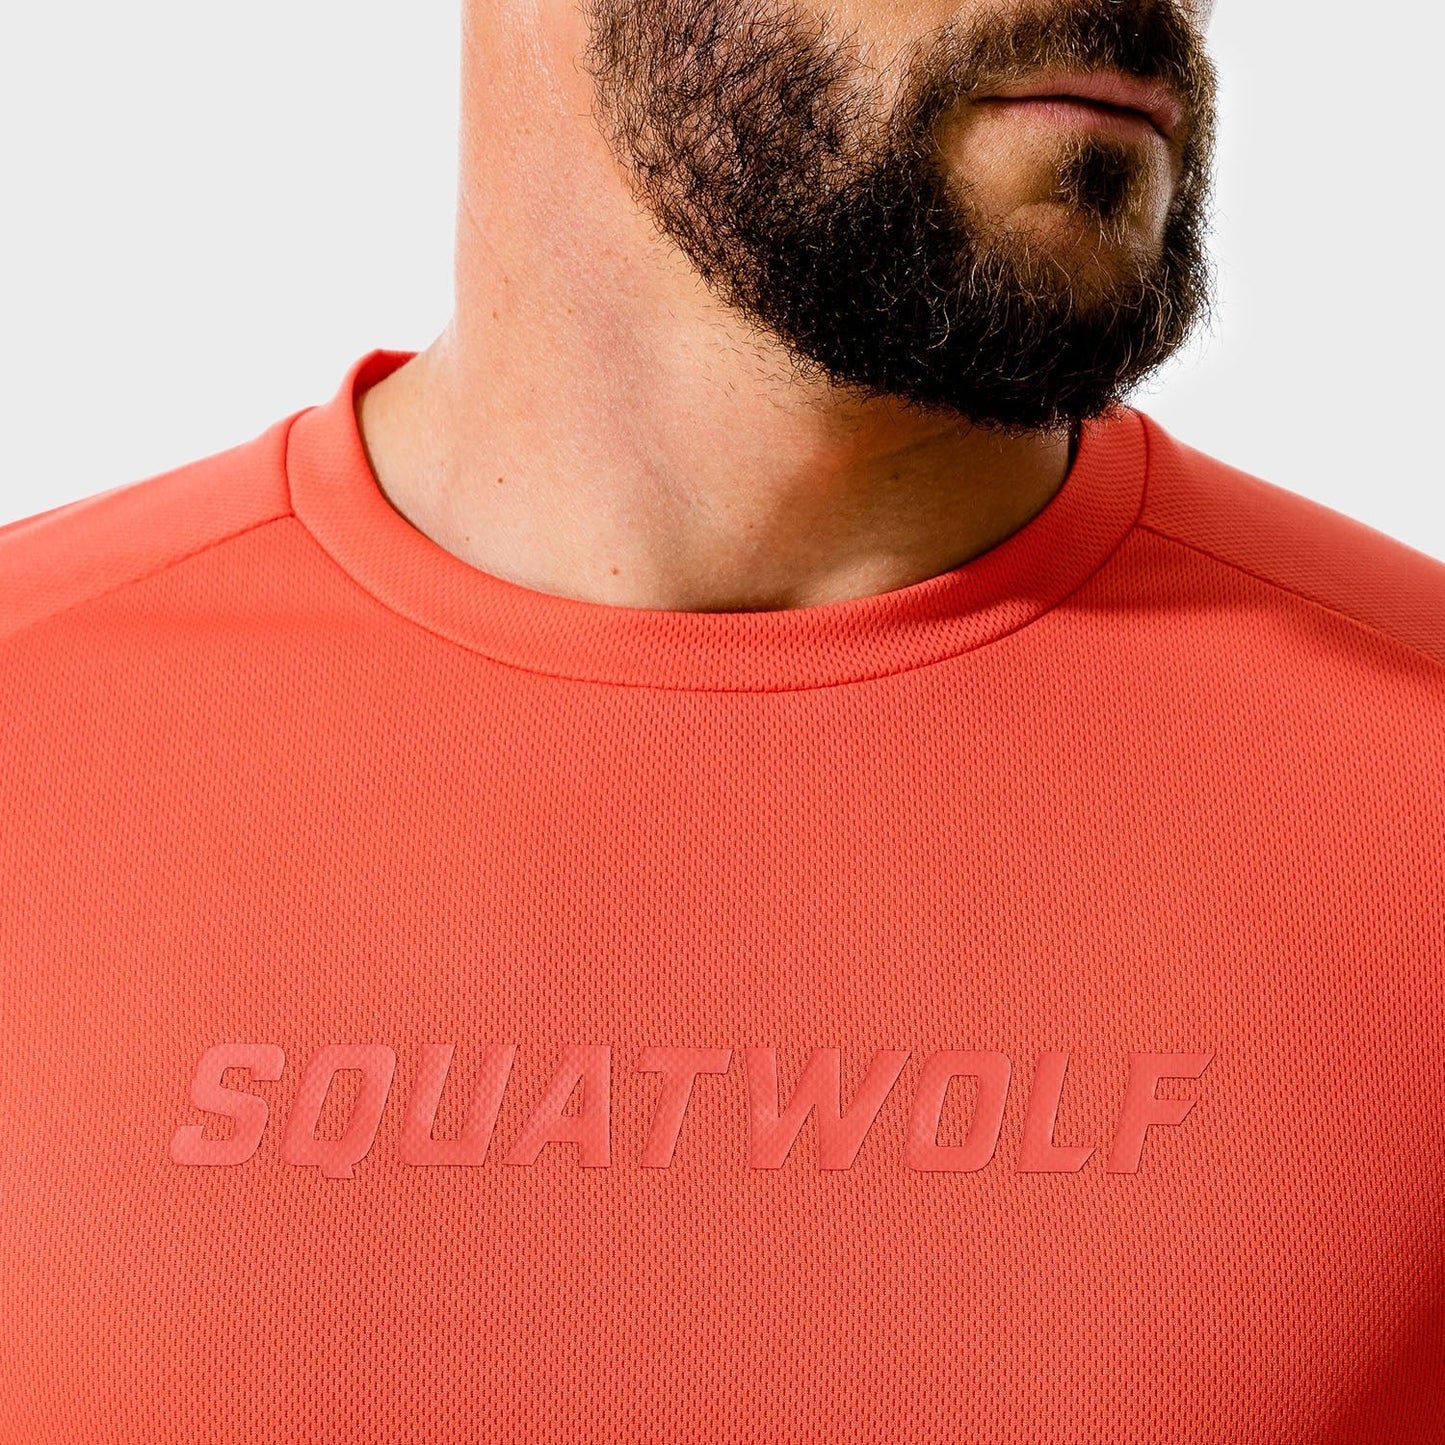 squatwolf-workout-shirts-for-men-lab-360-recycled-mesh-tee-hot-coral-gym-wear